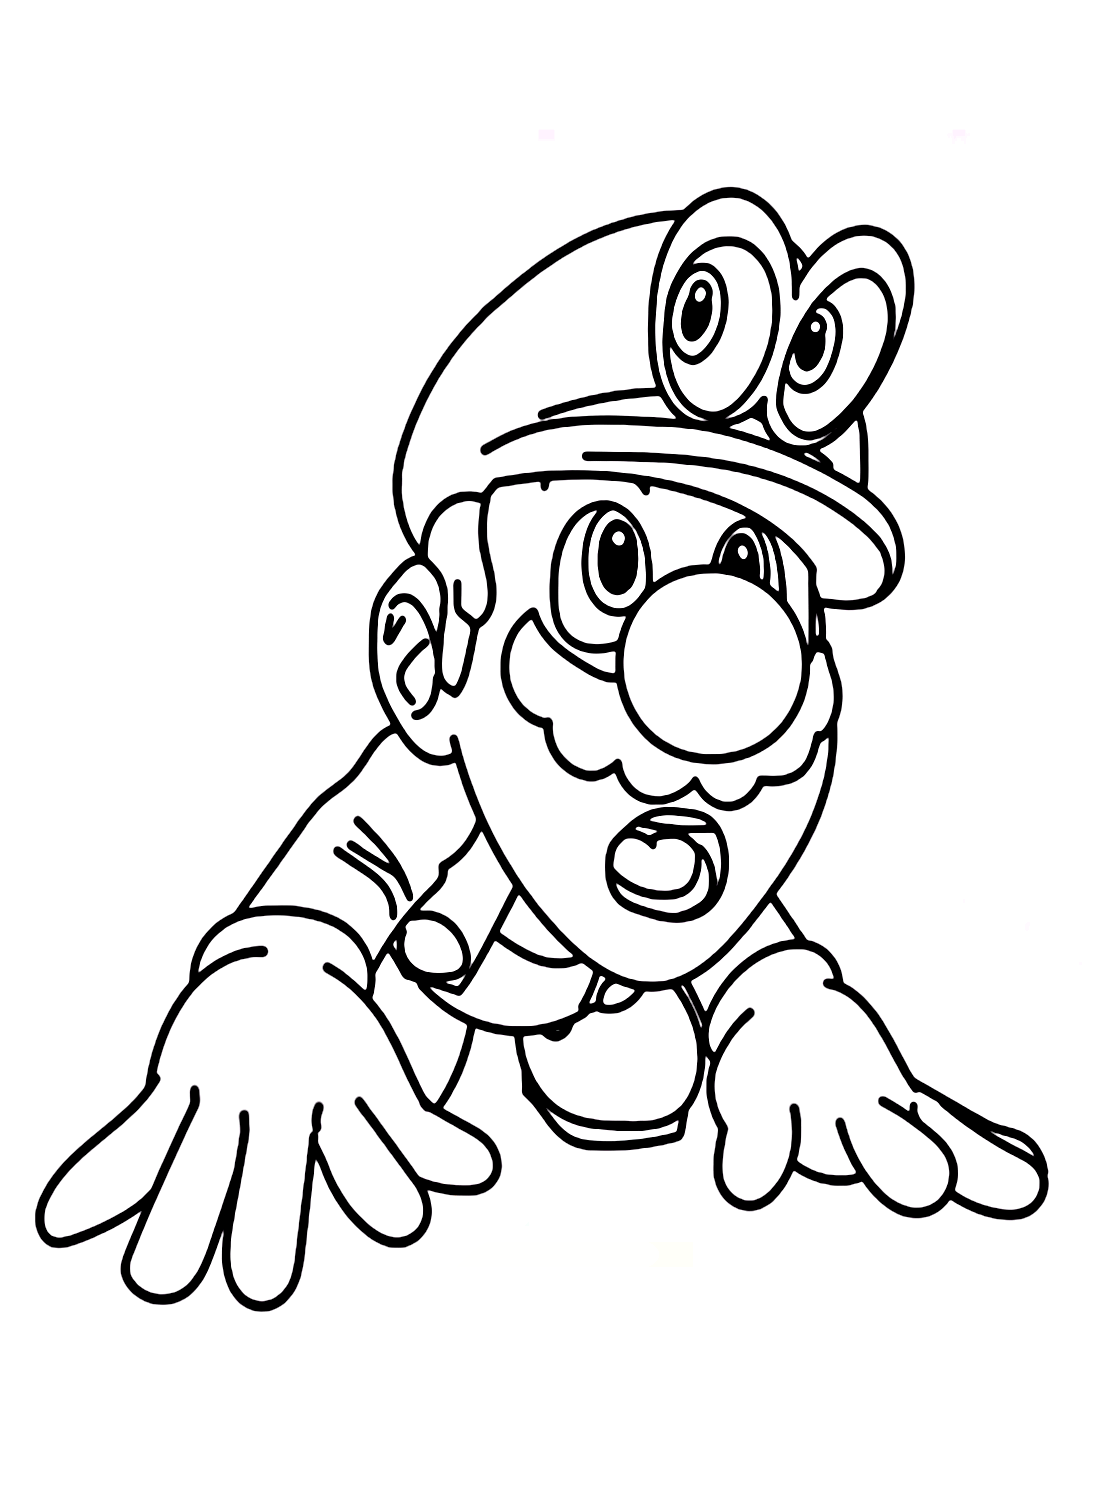 Super Mario Odyssey Coloring Pages Printable for Free Download